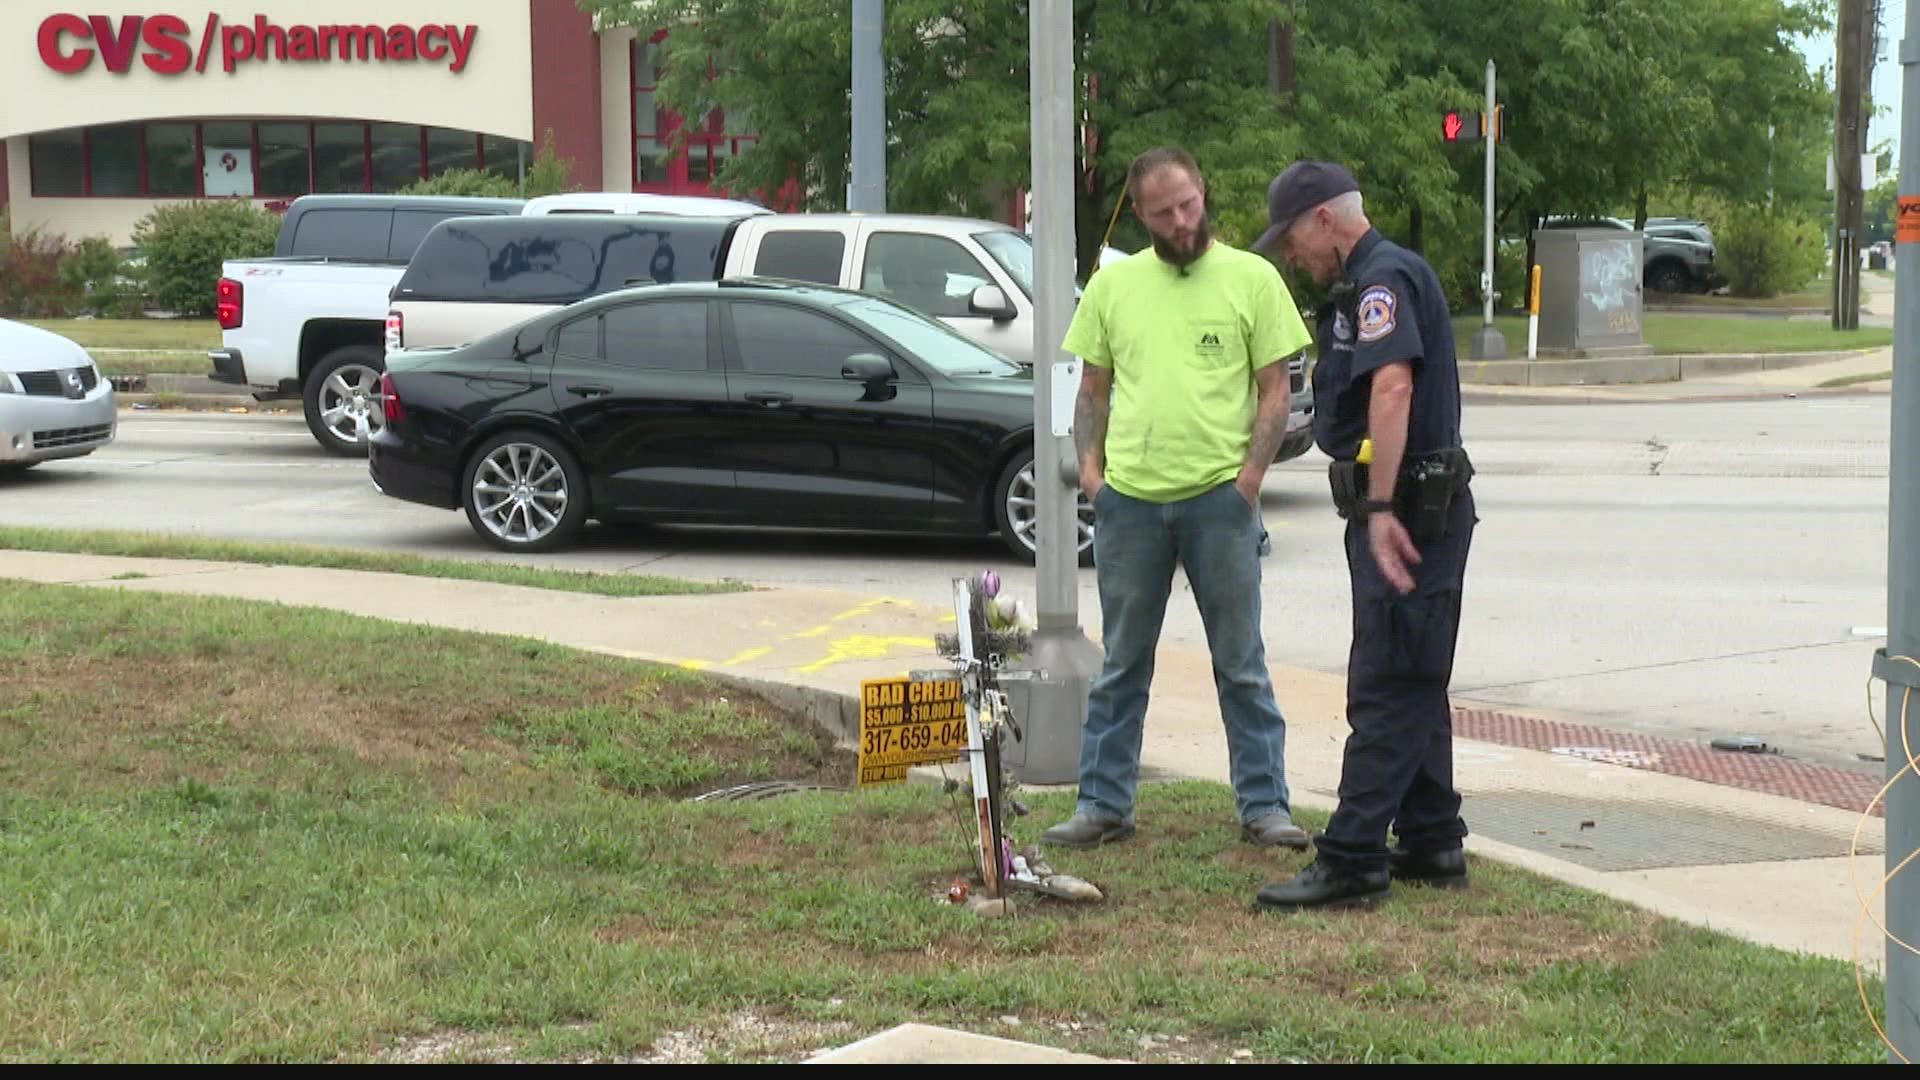 Video of the officer tending to a roadside memorial is getting lots of comment.